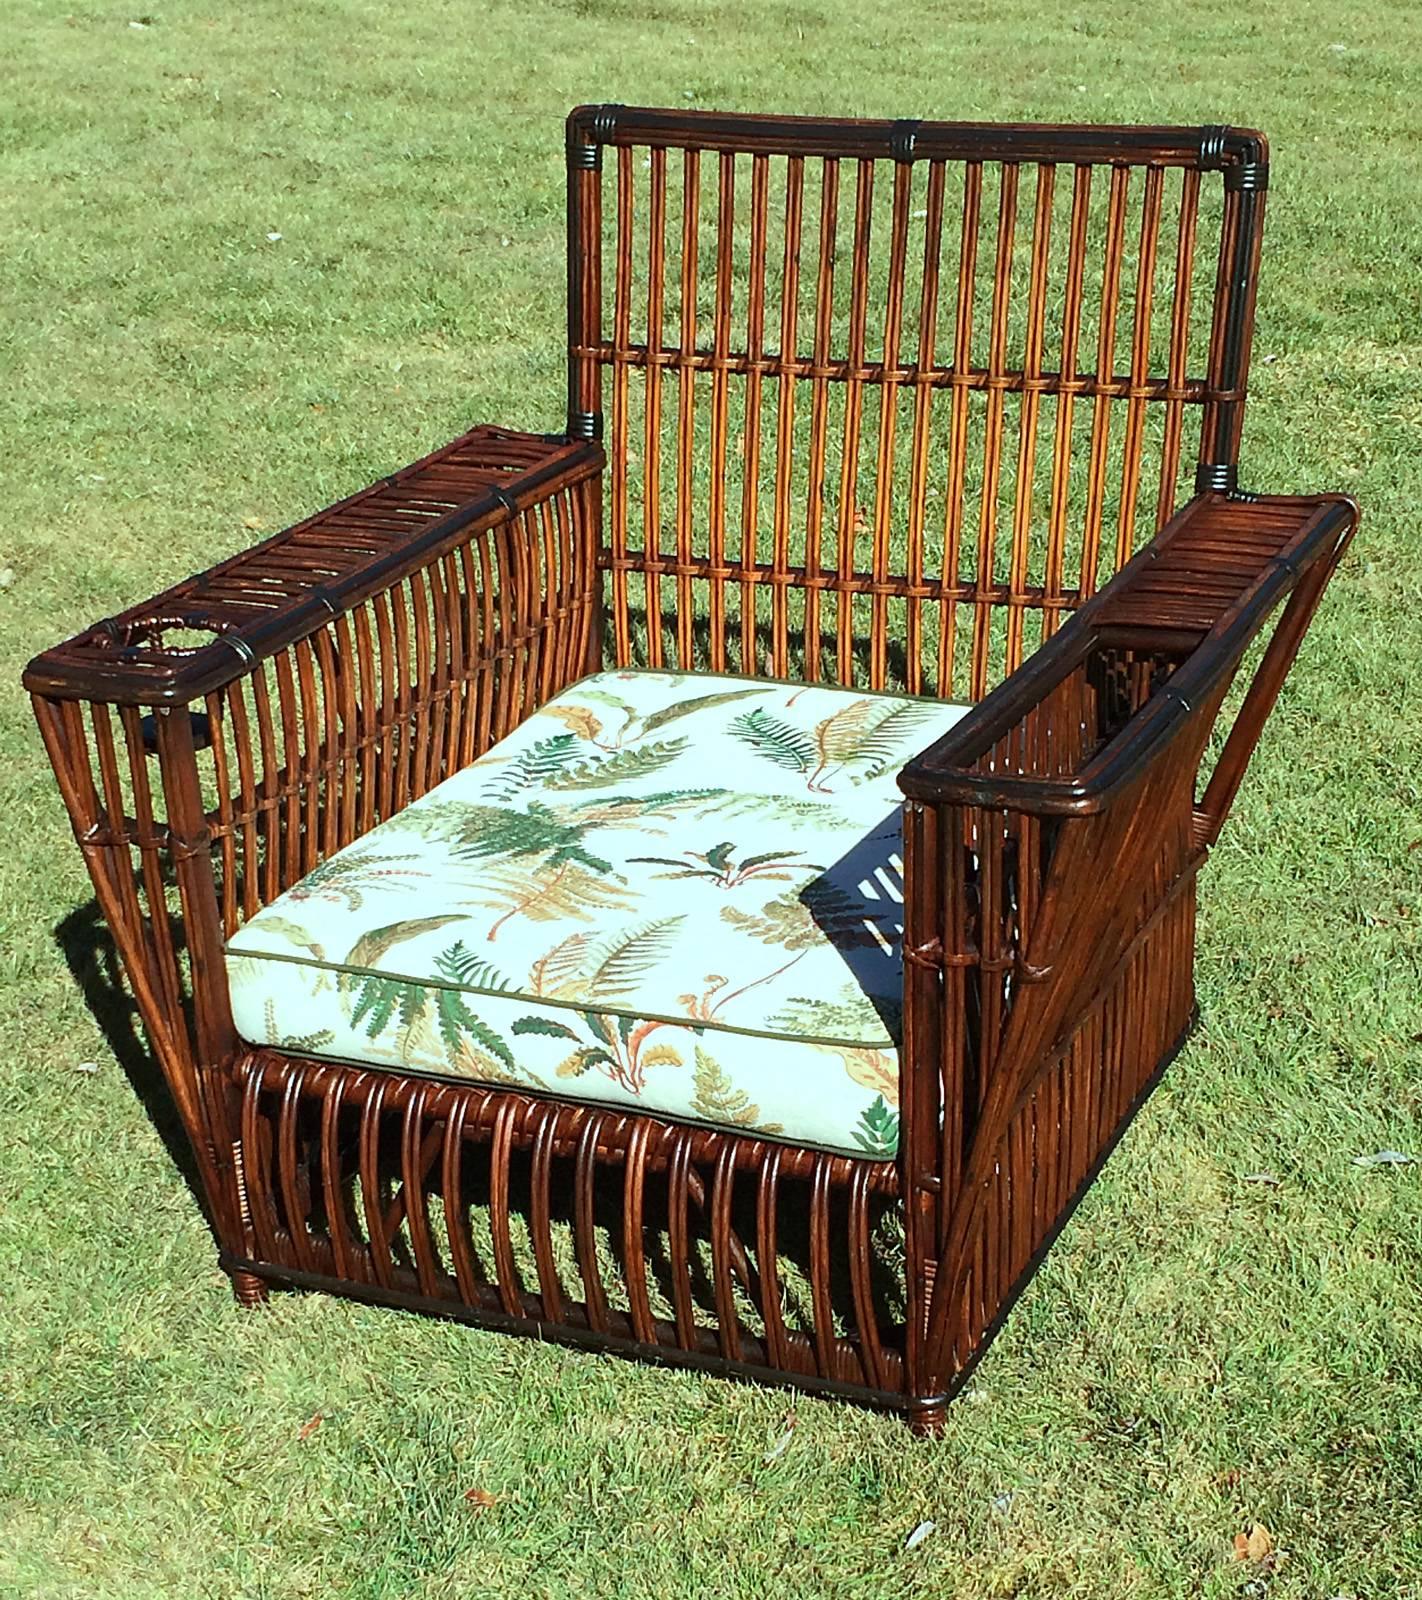 Large-scale Stick Wicker armchair in natural stained finish with black trim. Magazine holder in left arm, & beverage holder in right arm. Closely paired reeds overall. Seat platform of paired reeds having older cushion & back pillow. Celluloid label